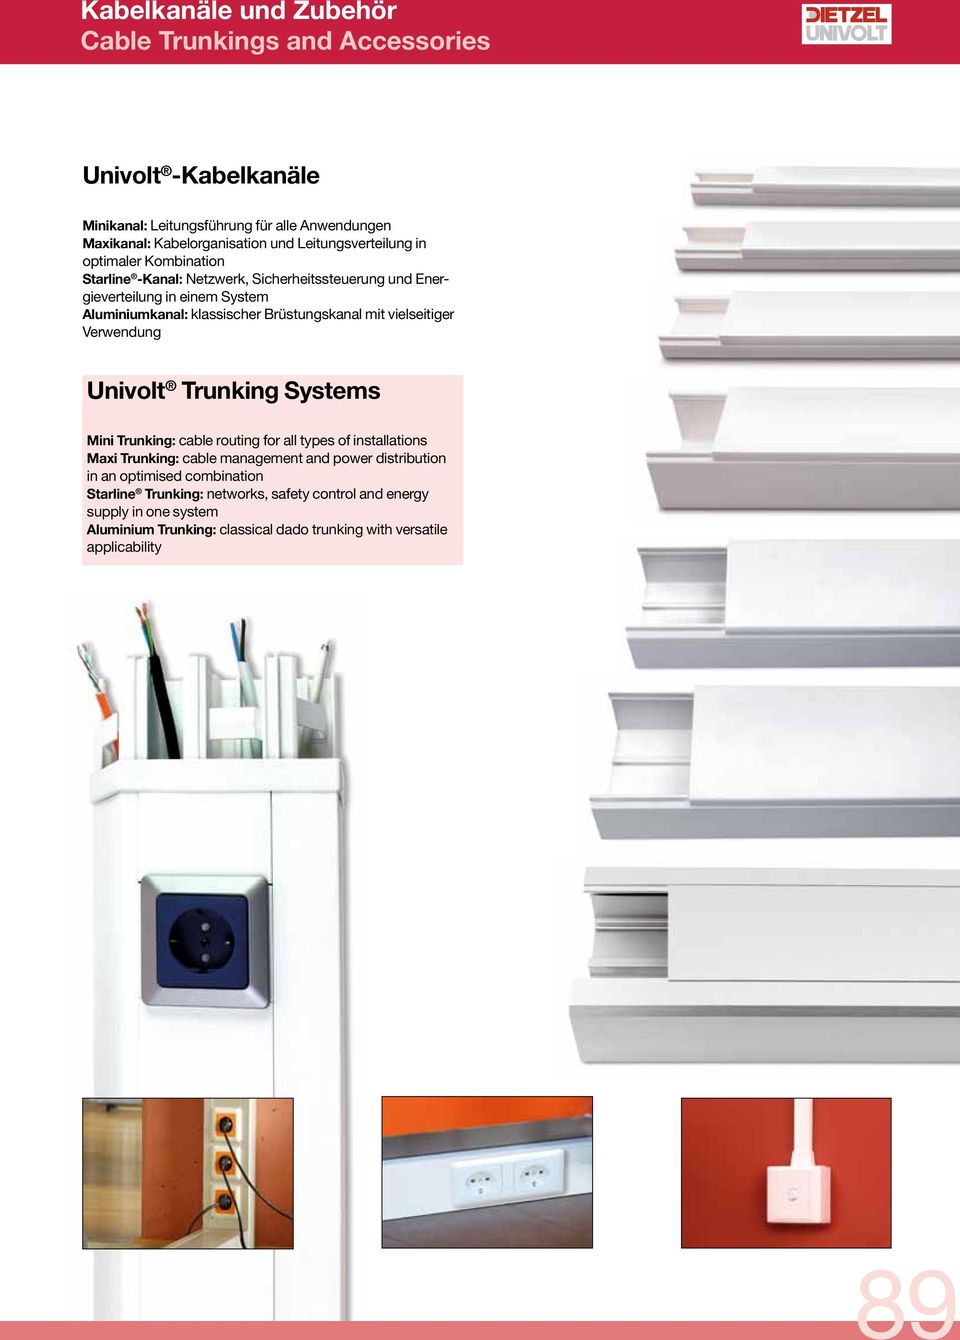 Univolt Trunking Systems Mini Trunking: cable routing for all types of installations Maxi Trunking: cable management and power distribution in an